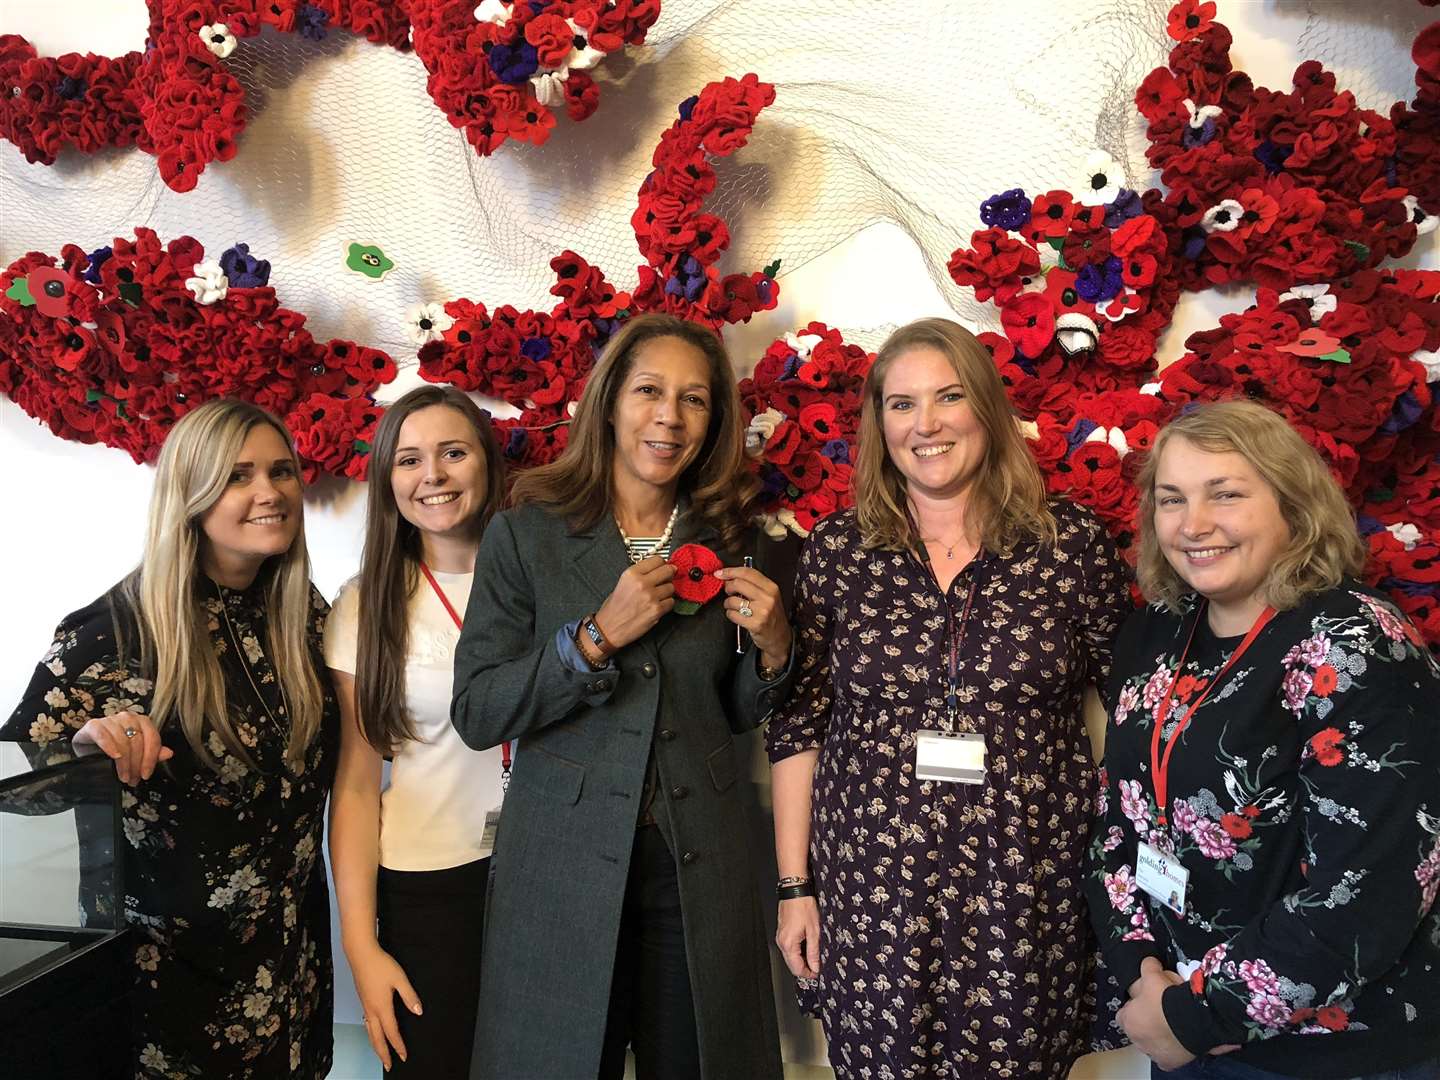 Helen Grant visited Maidstone Museum's #5000Poppies project which opened on Tuesday